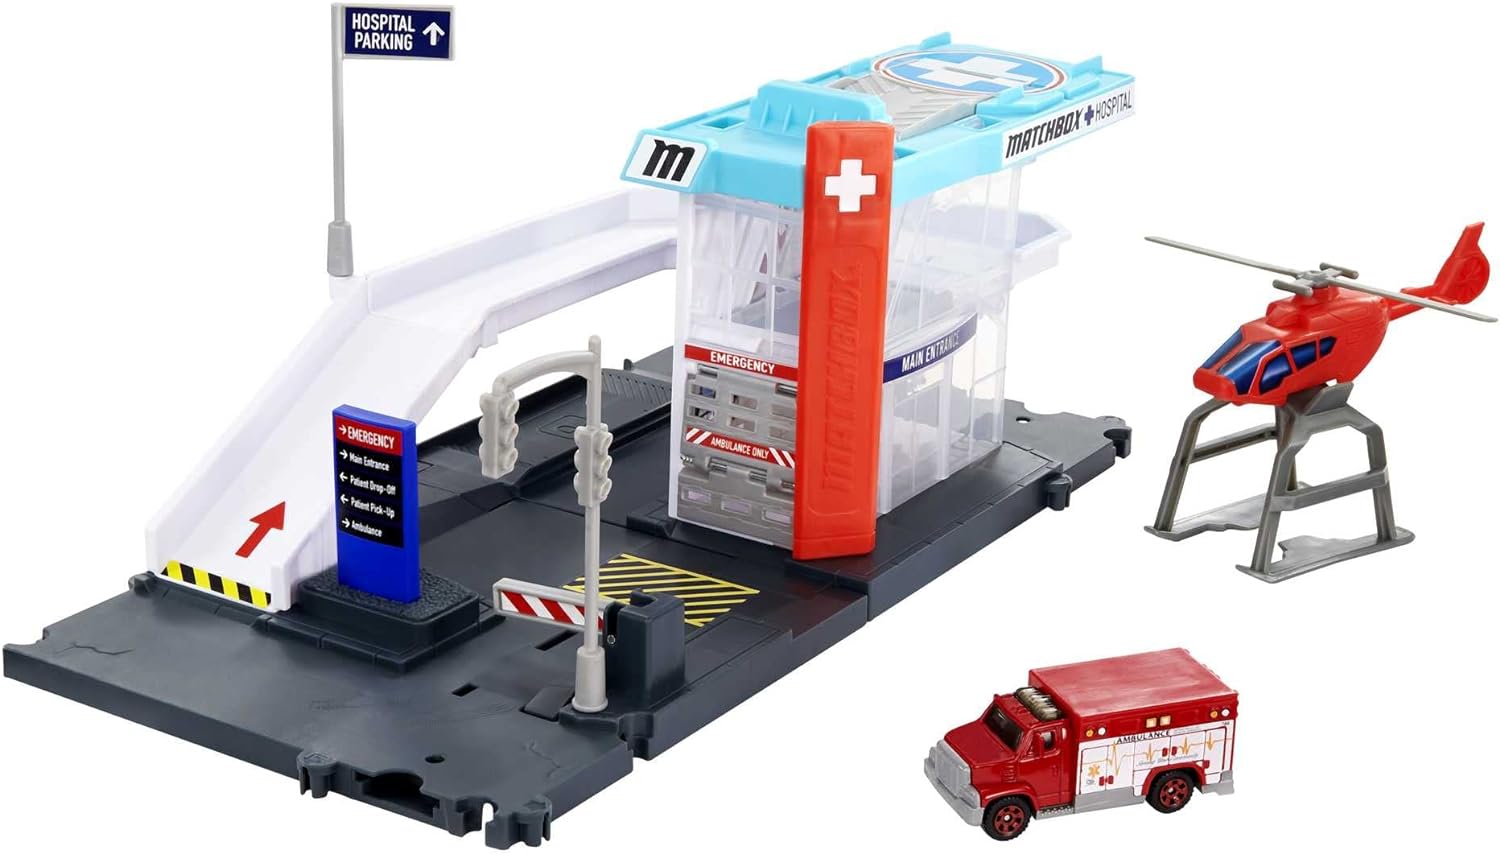 Matchbox Cars Action Drivers Playset w/ Helicopter & Toy Ambulance $9.10 & More + Free Shipping w/ Prime or on $35+